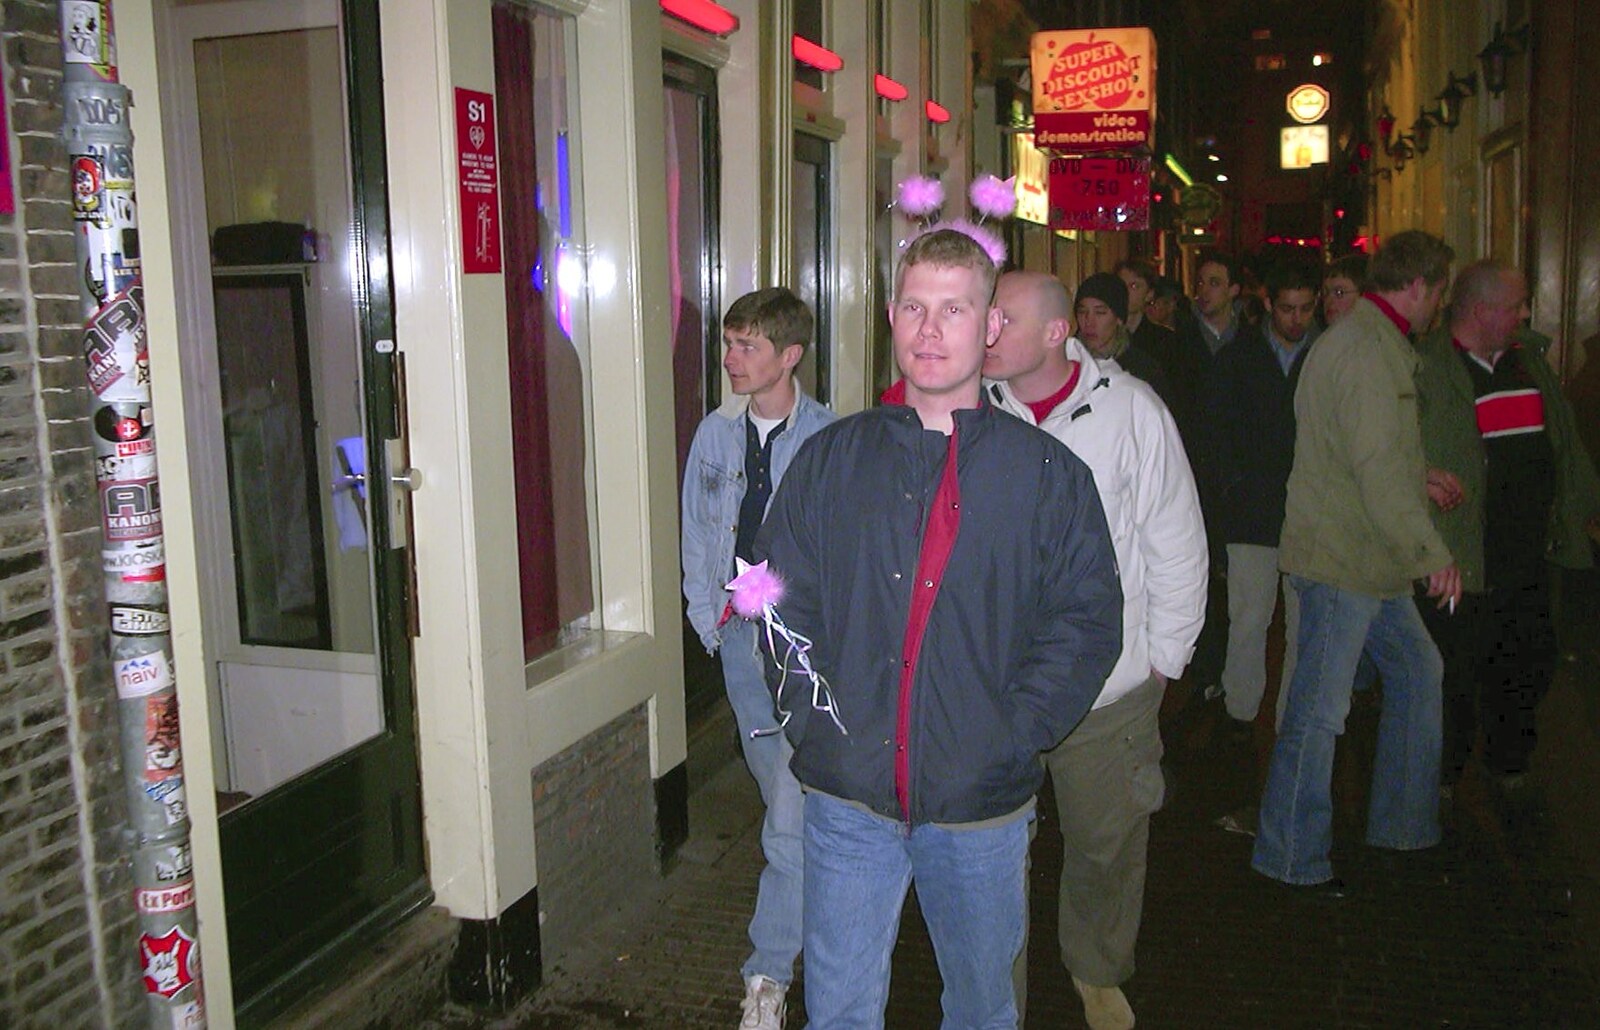 Wandering past the famous windows from Mikey-P's Stag Weekend, Amsterdam, Netherlands - 5th March 2004